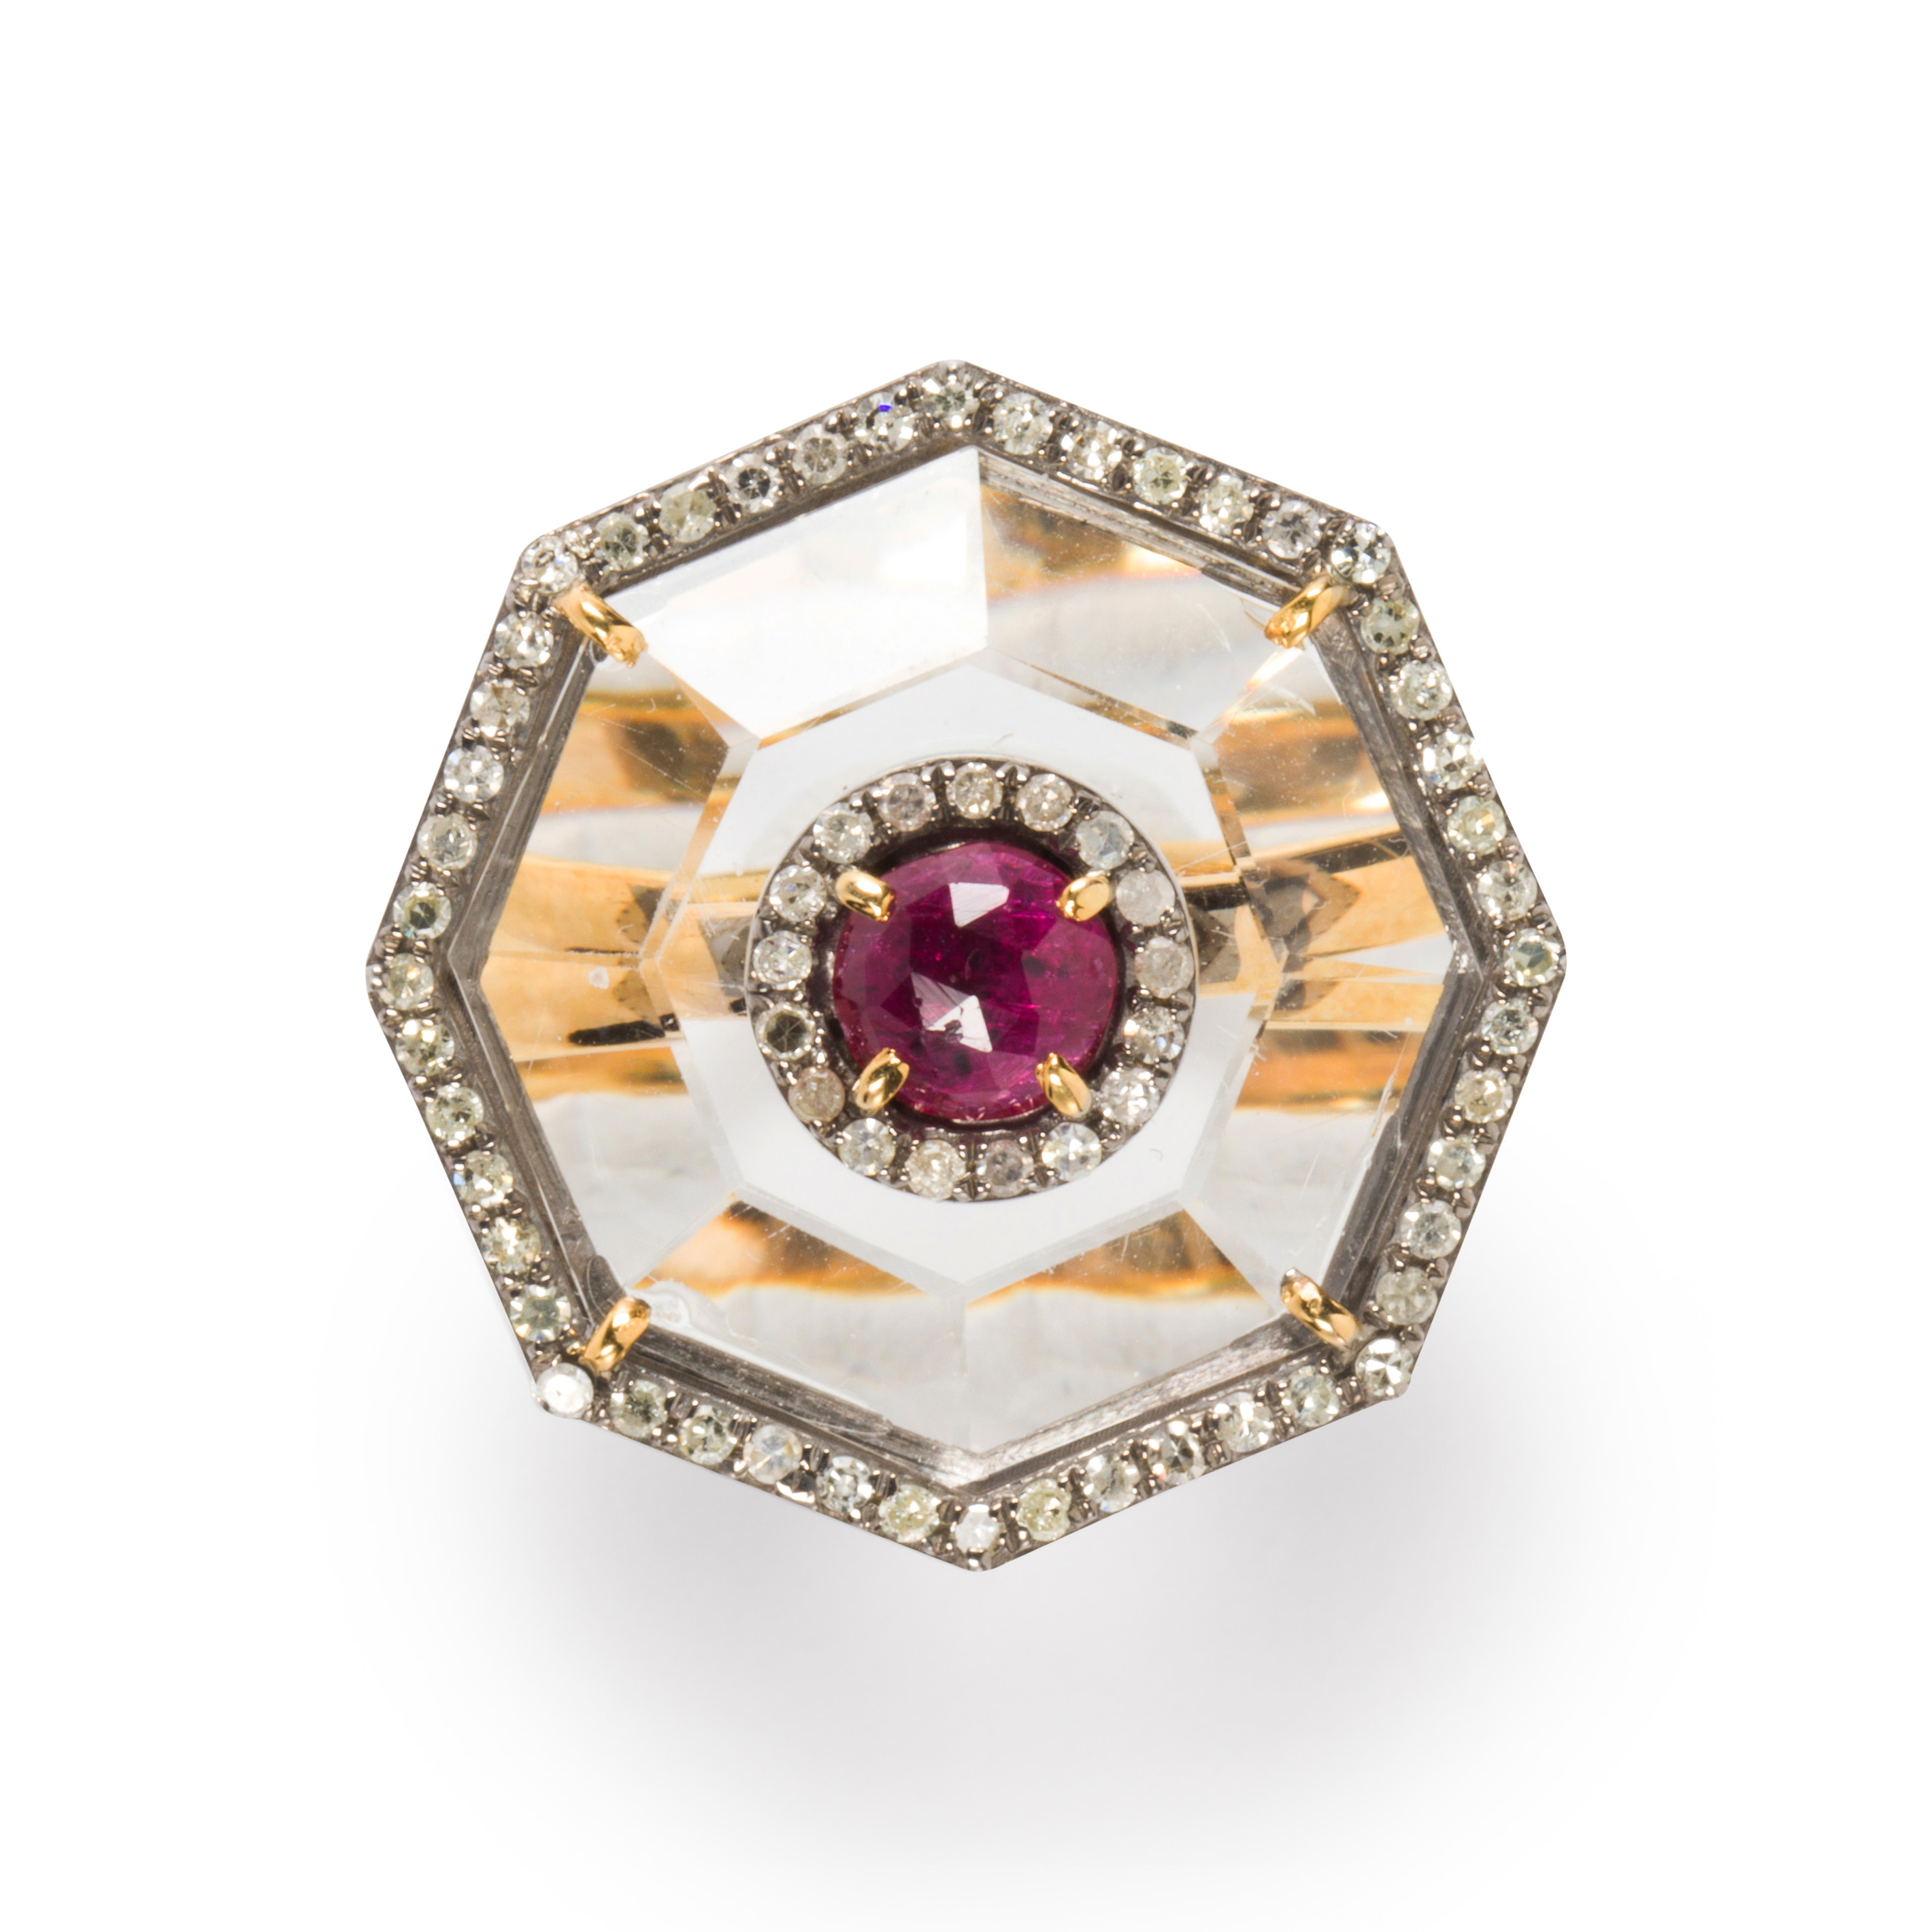 A ROCK CRYSTAL, RUBY AND DIAMOND RING